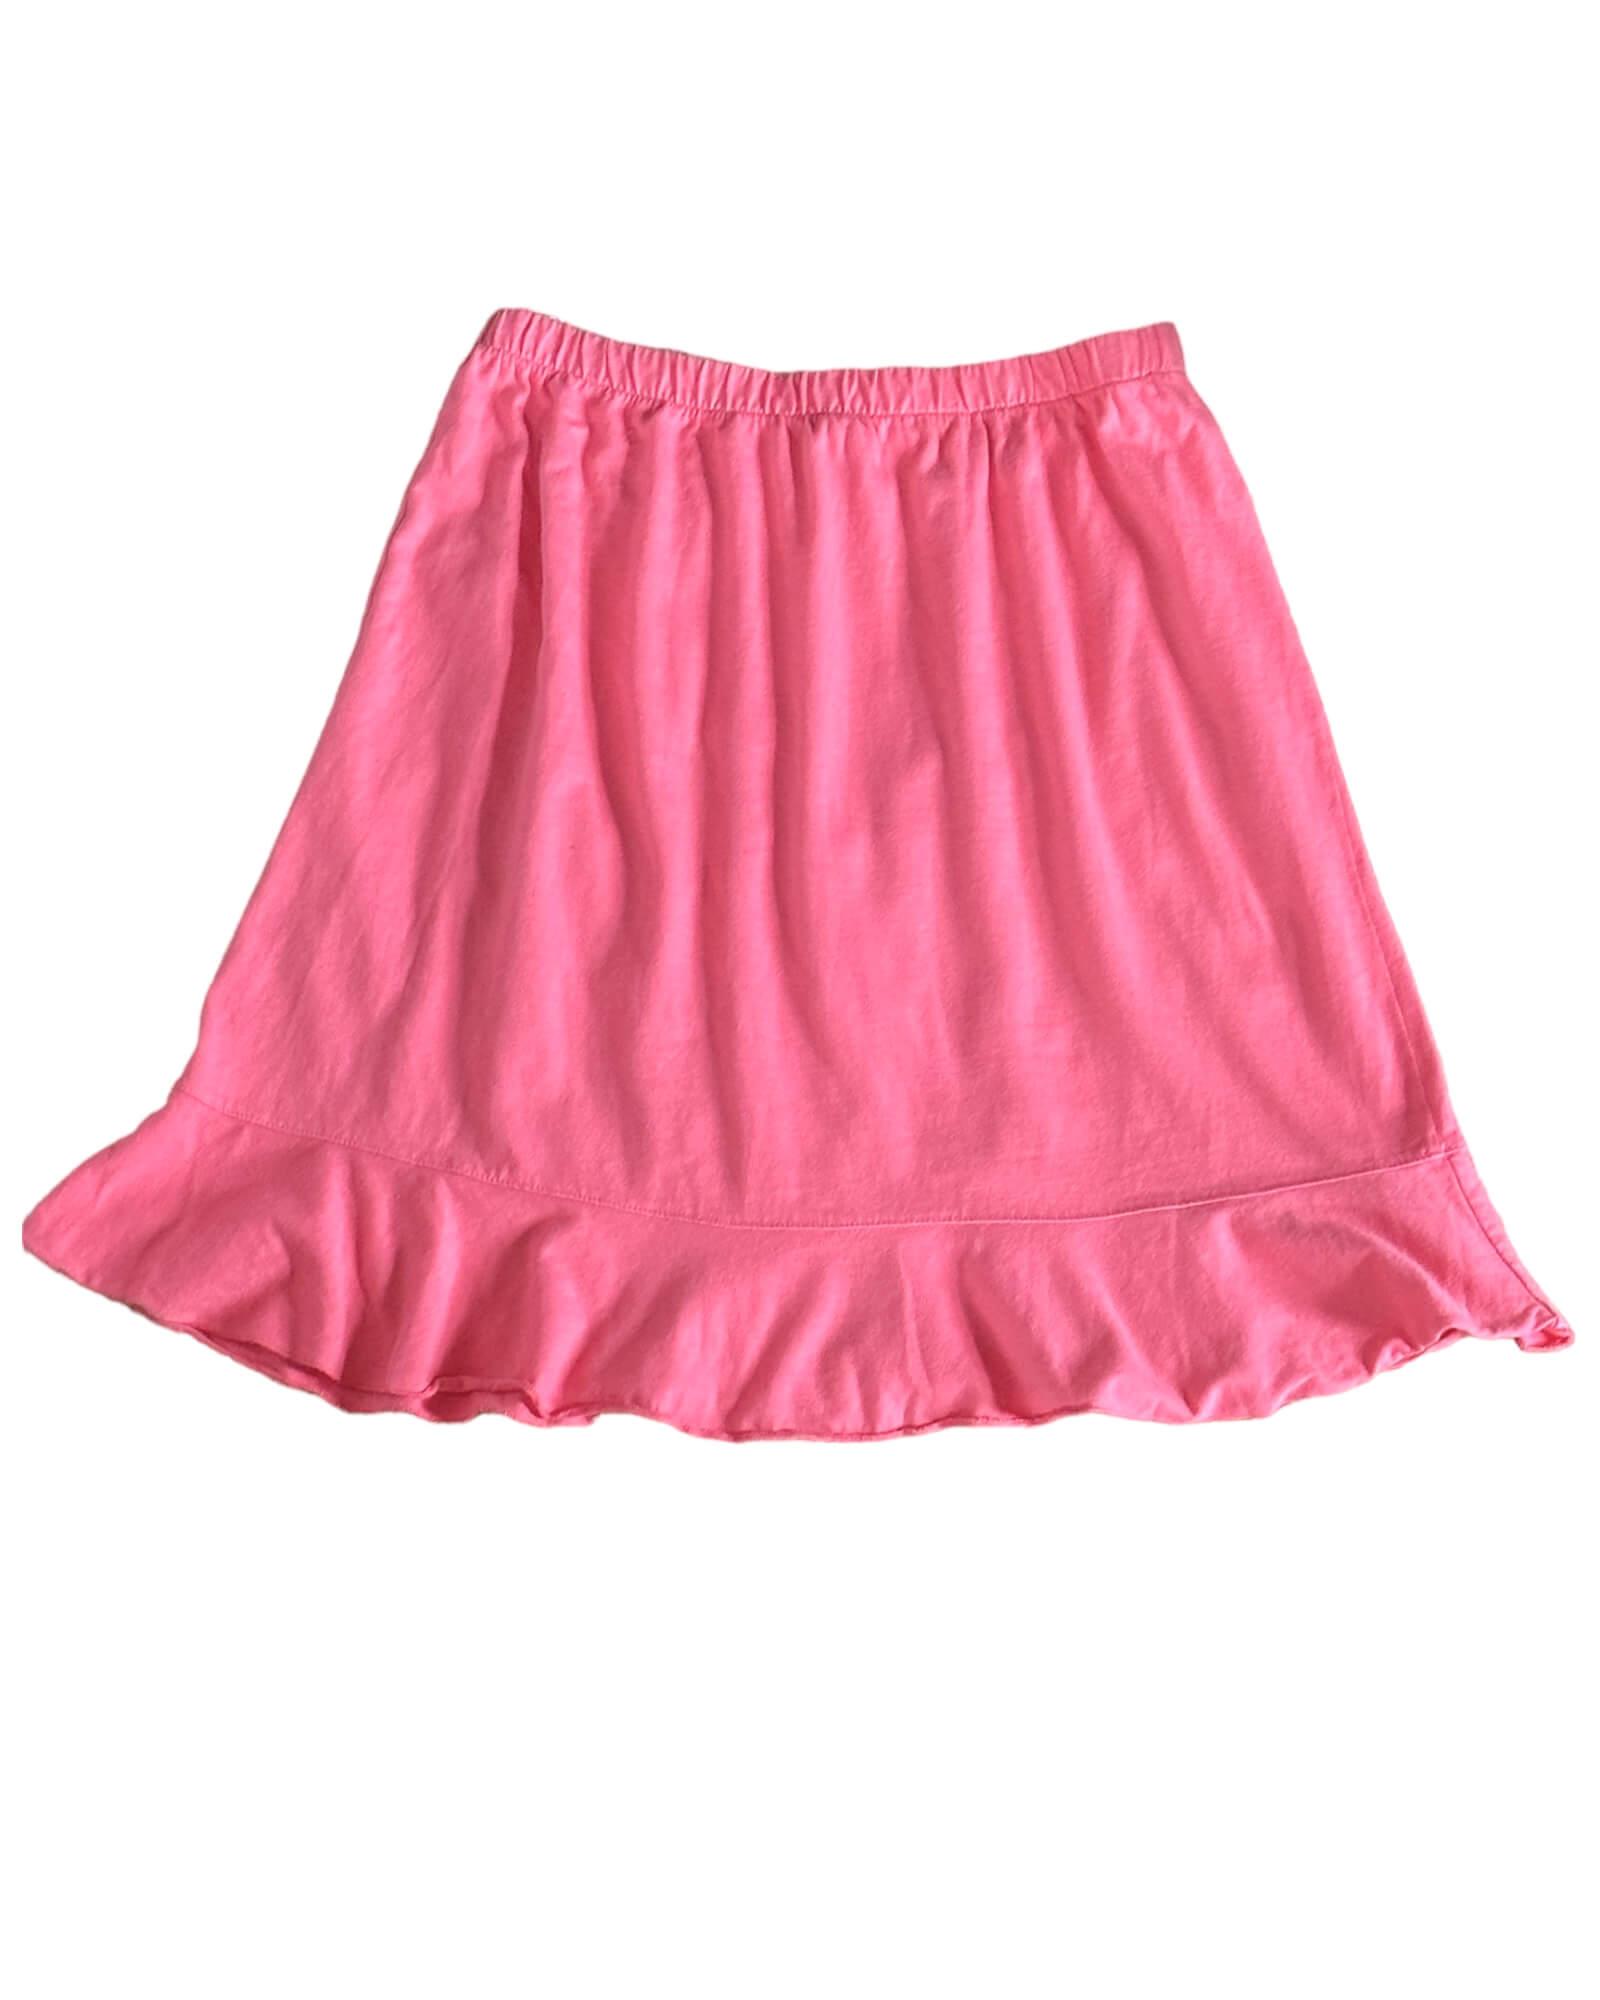 Light Spring I CAN TOO resort wear hibiscus pink knit ruffle skirt